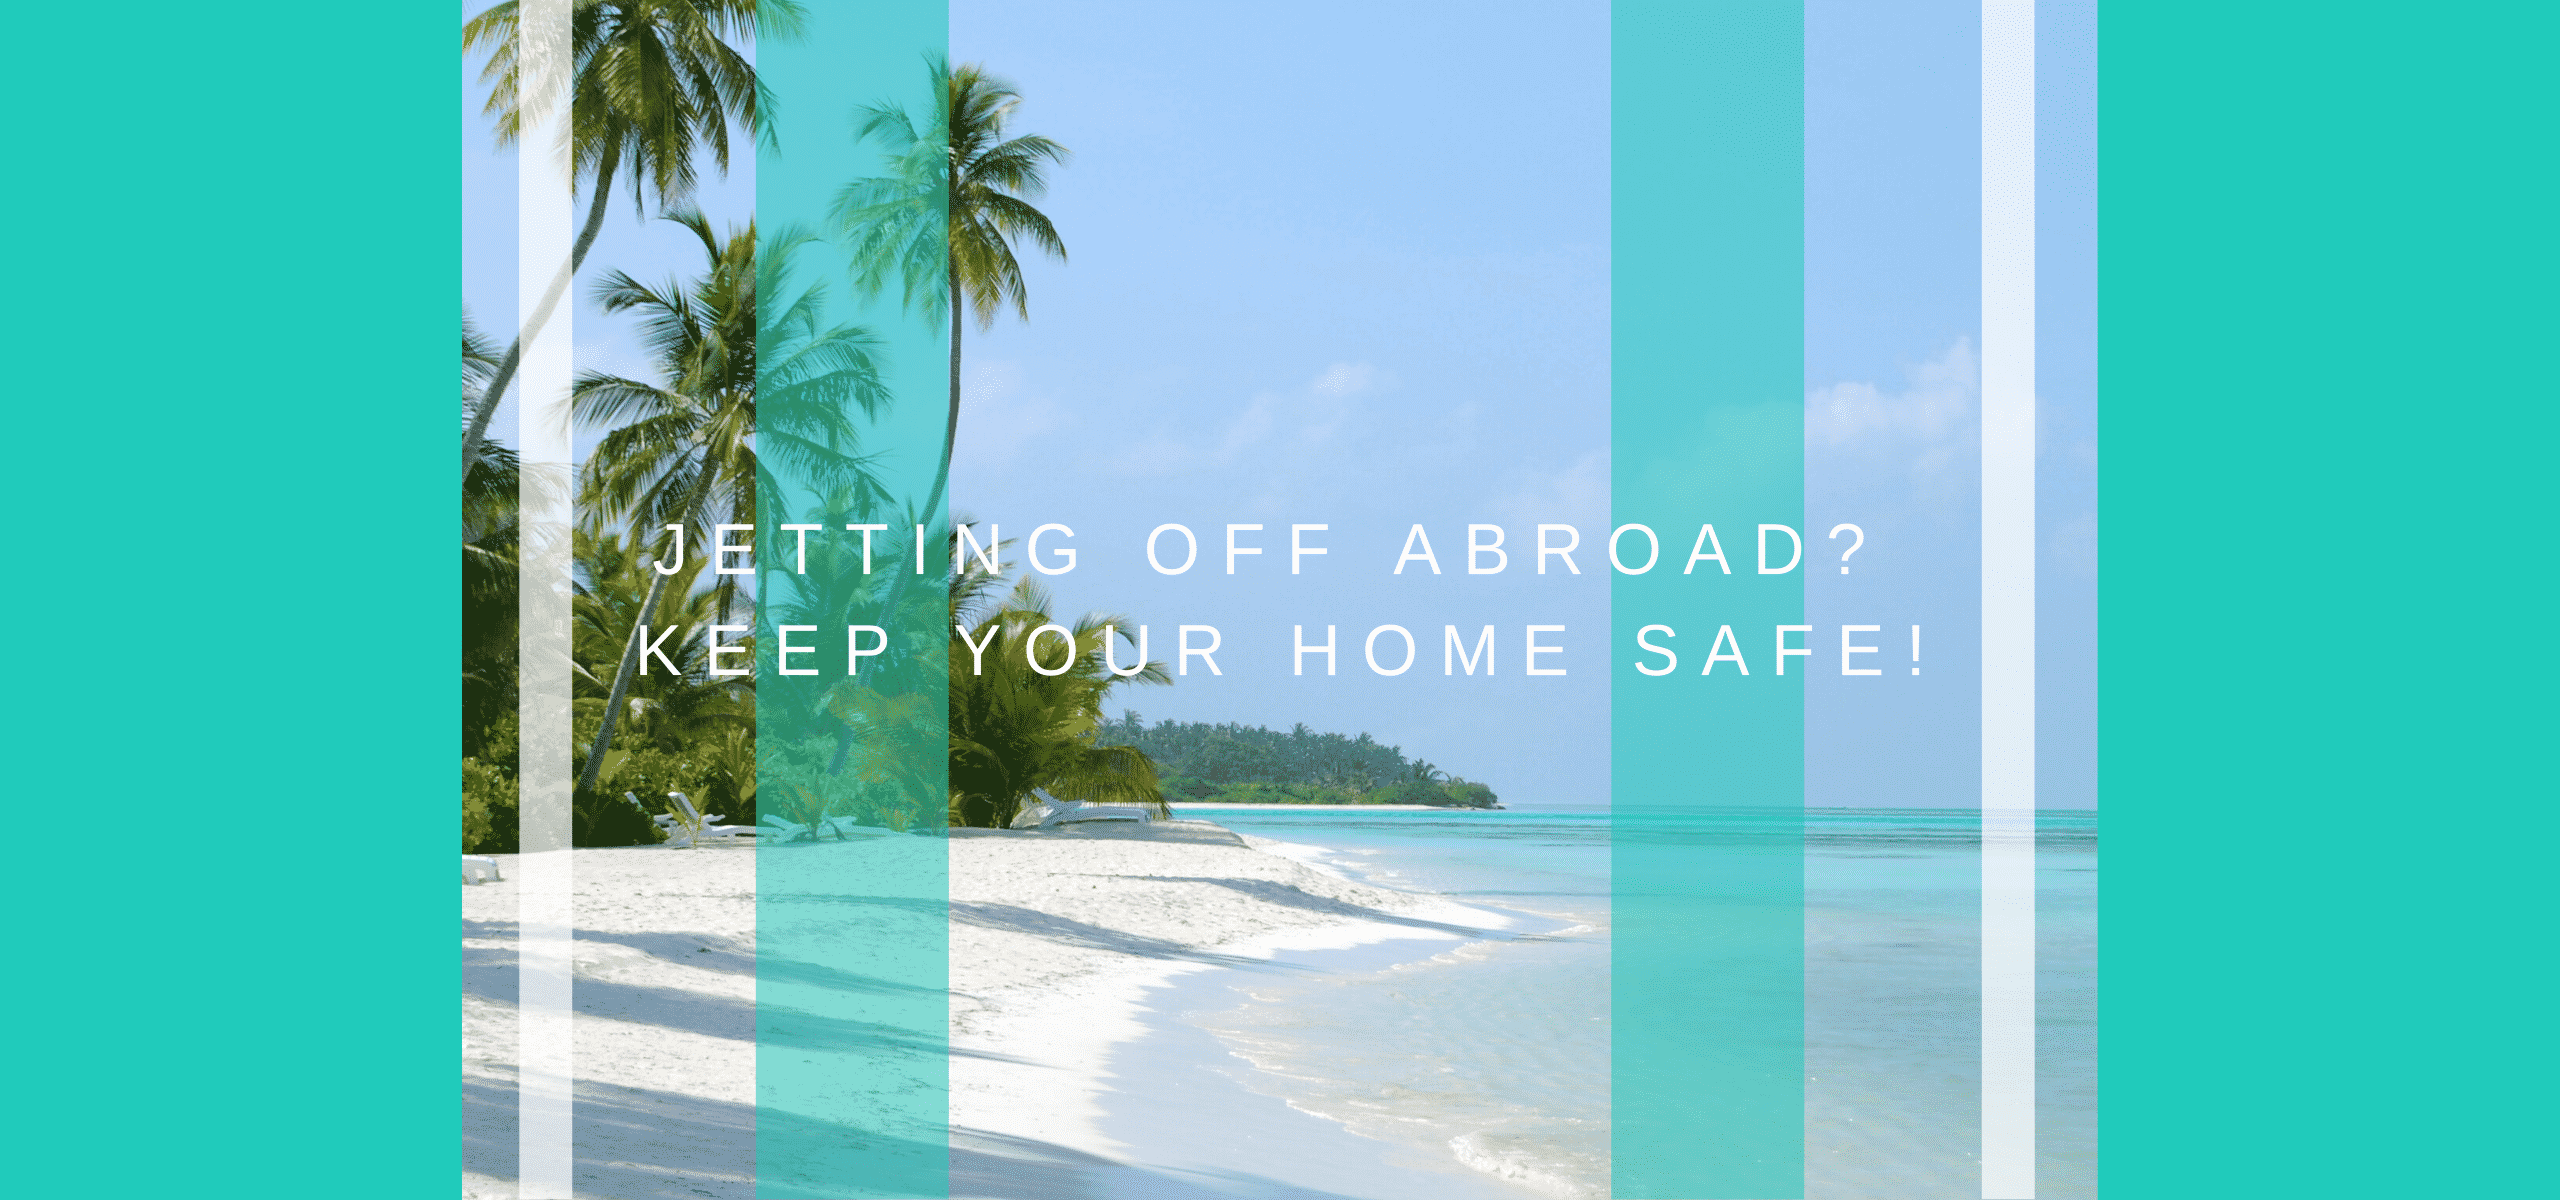 Jetting off abroad? Keep your home safe!